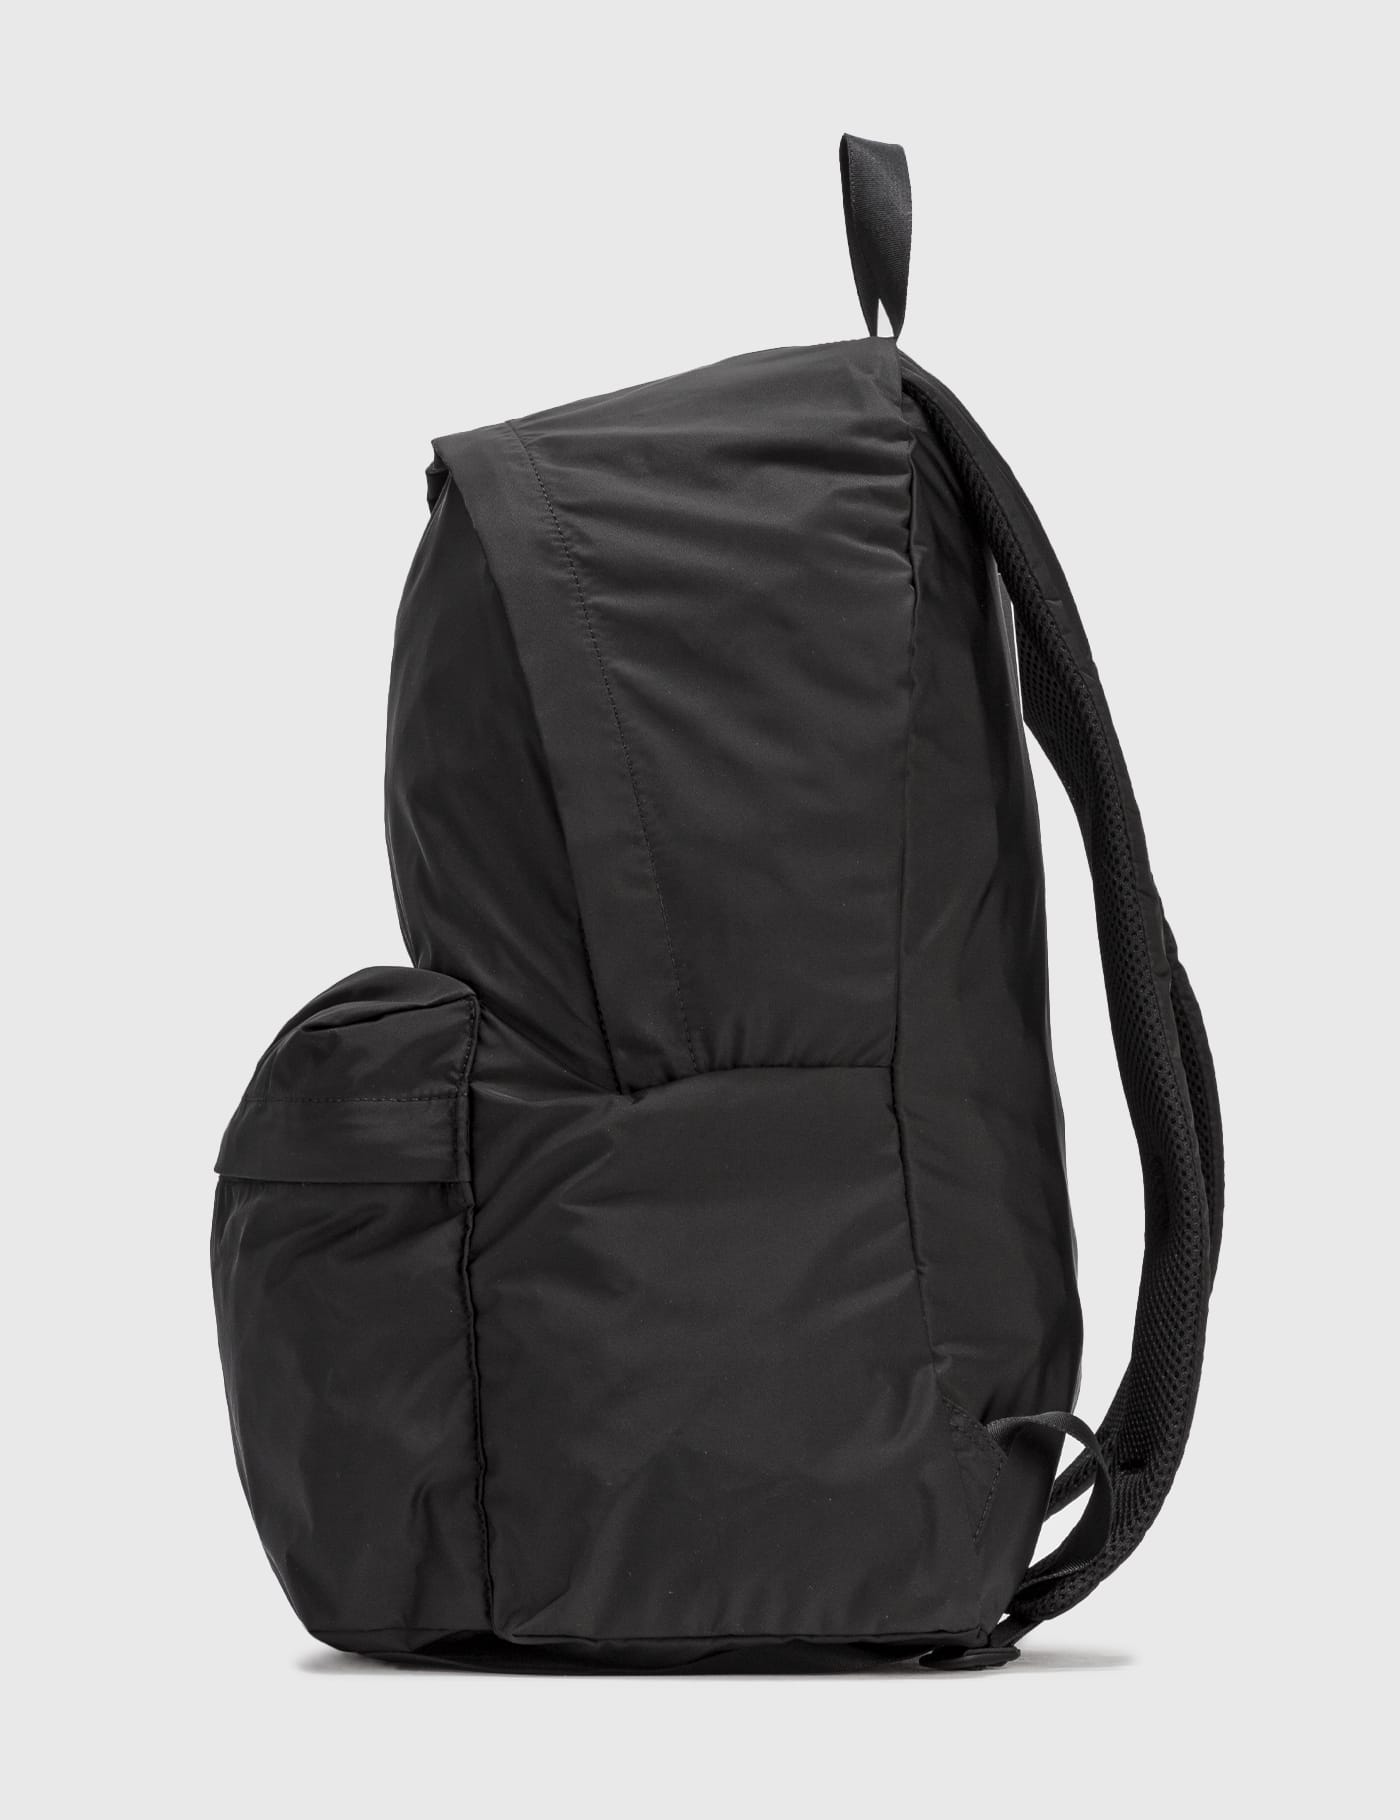 RAMIDUS - DAYPACK | HBX - Globally Curated Fashion and Lifestyle